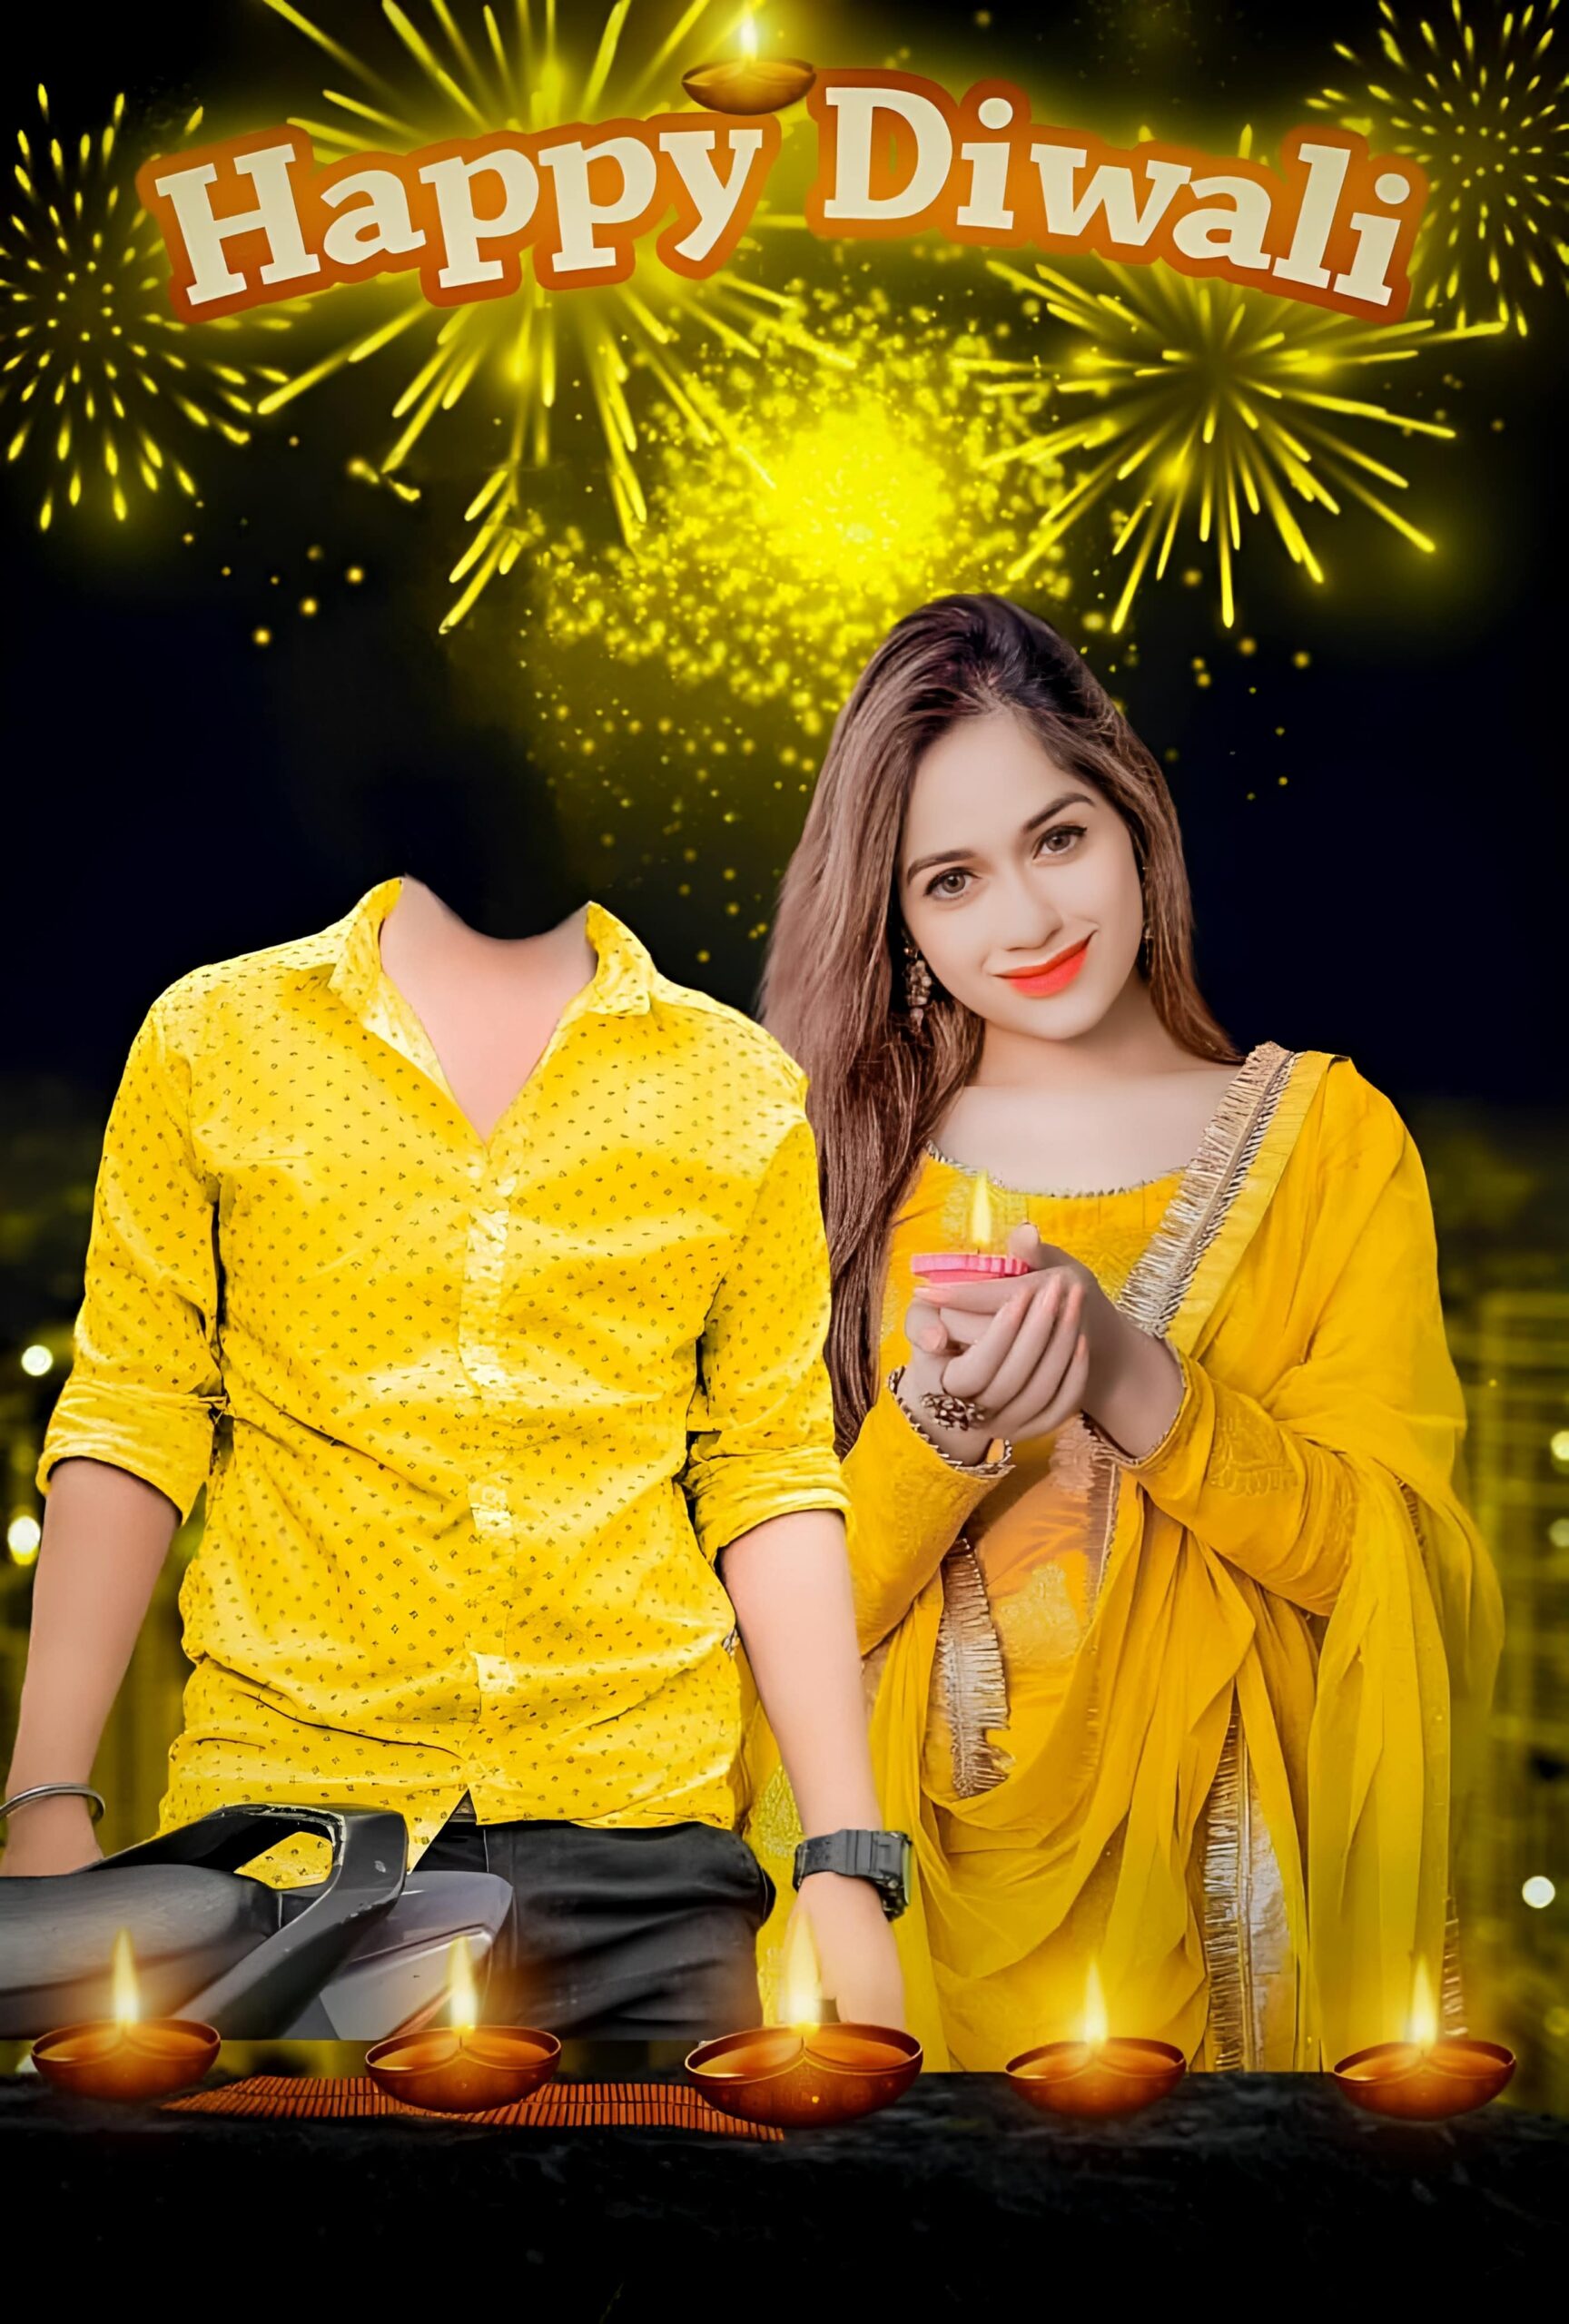 Without Face Boy Girl Diwali Photo Editing Background 